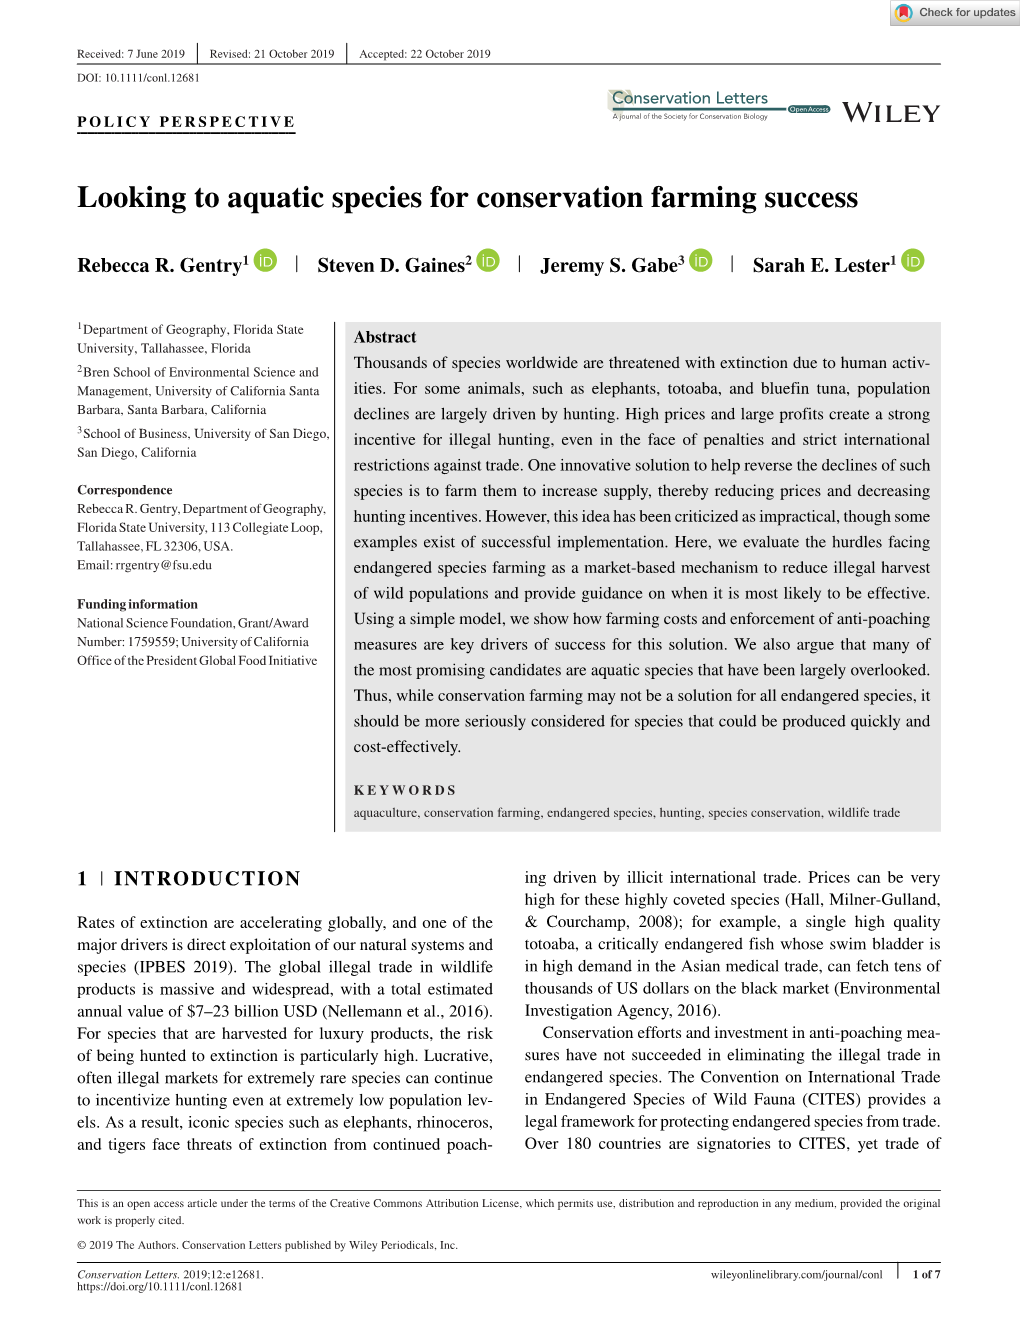 Looking to Aquatic Species for Conservation Farming Success